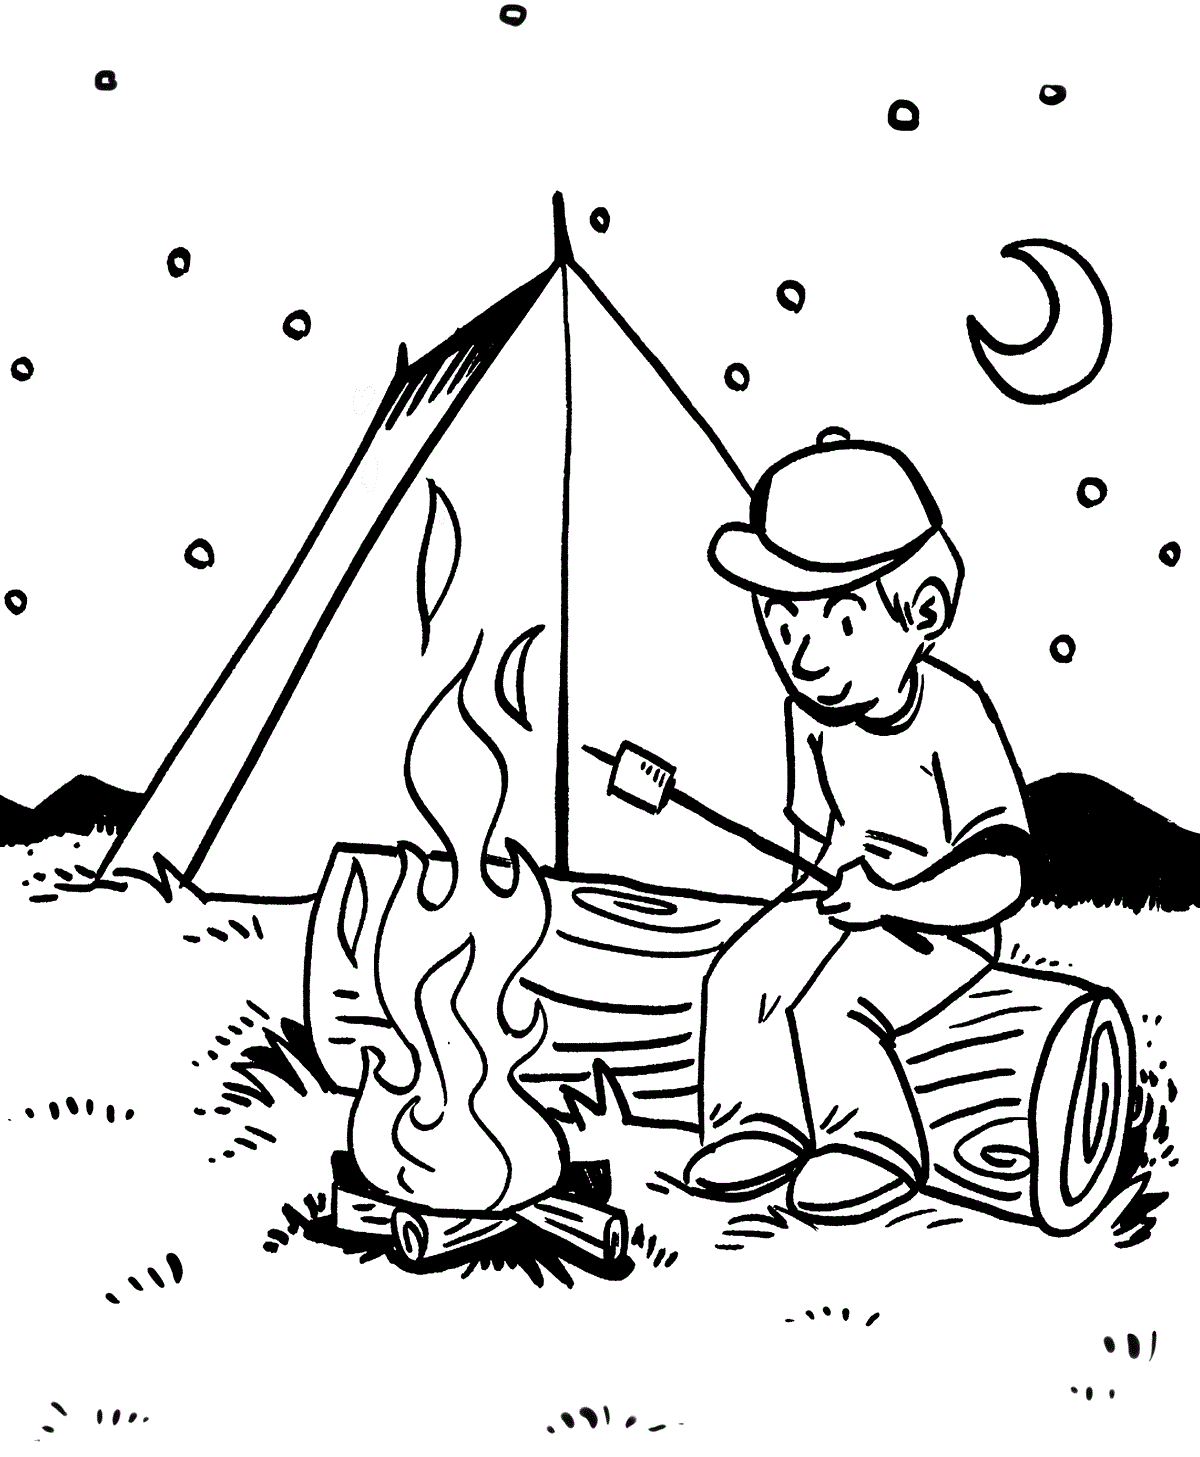 People And Jobs Coloring Pages For Kids